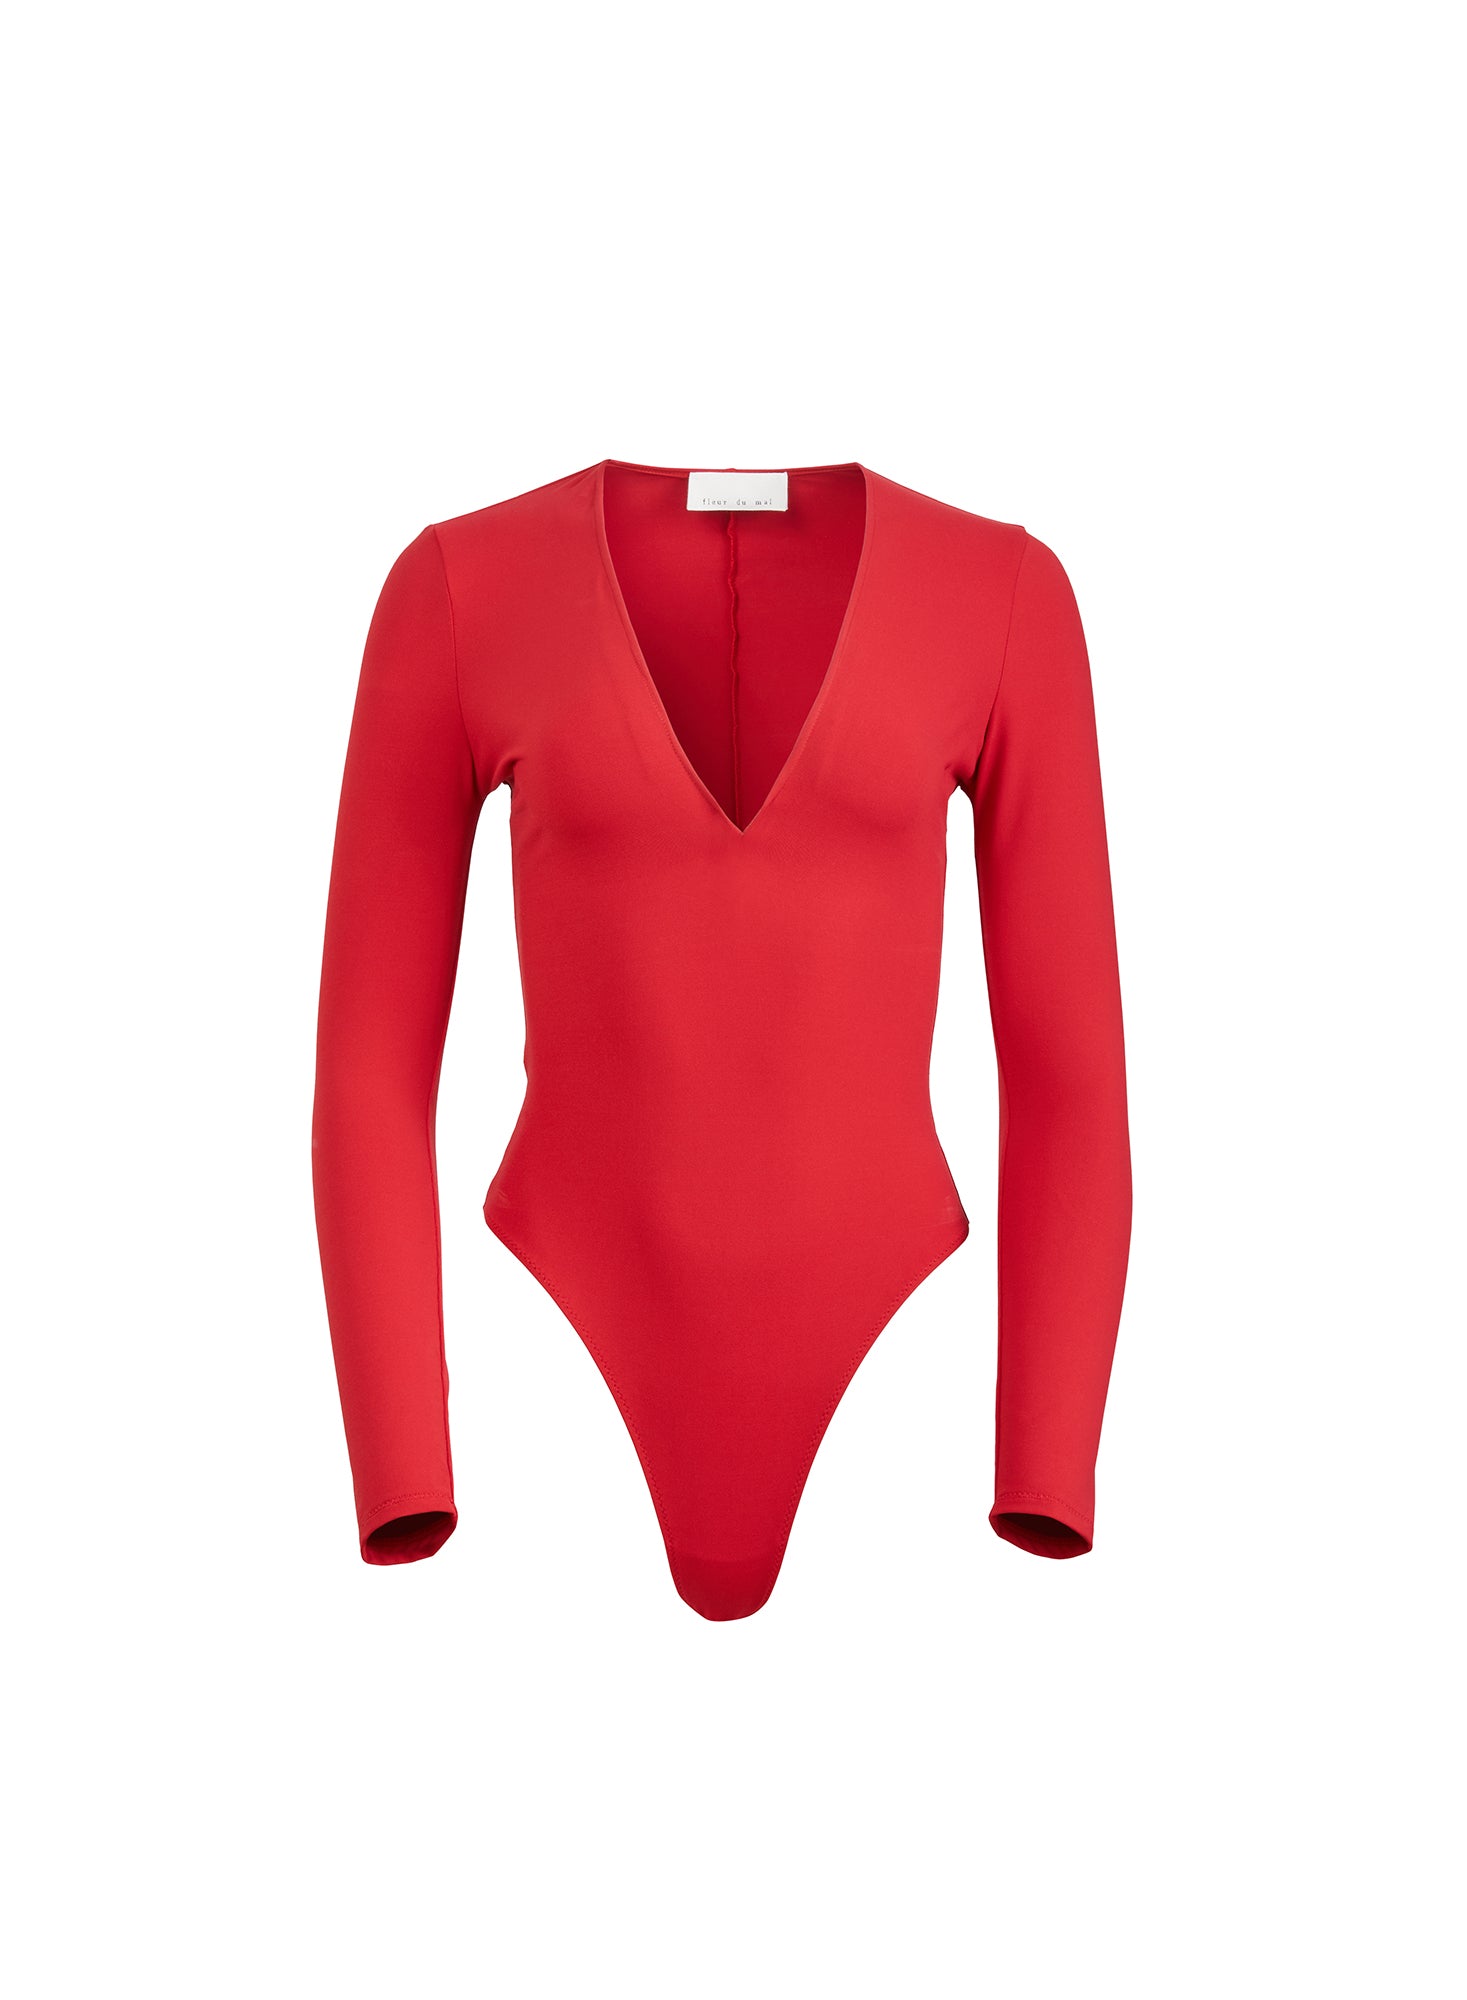 Red Deep Plunge Bodysuit New Look, Compare